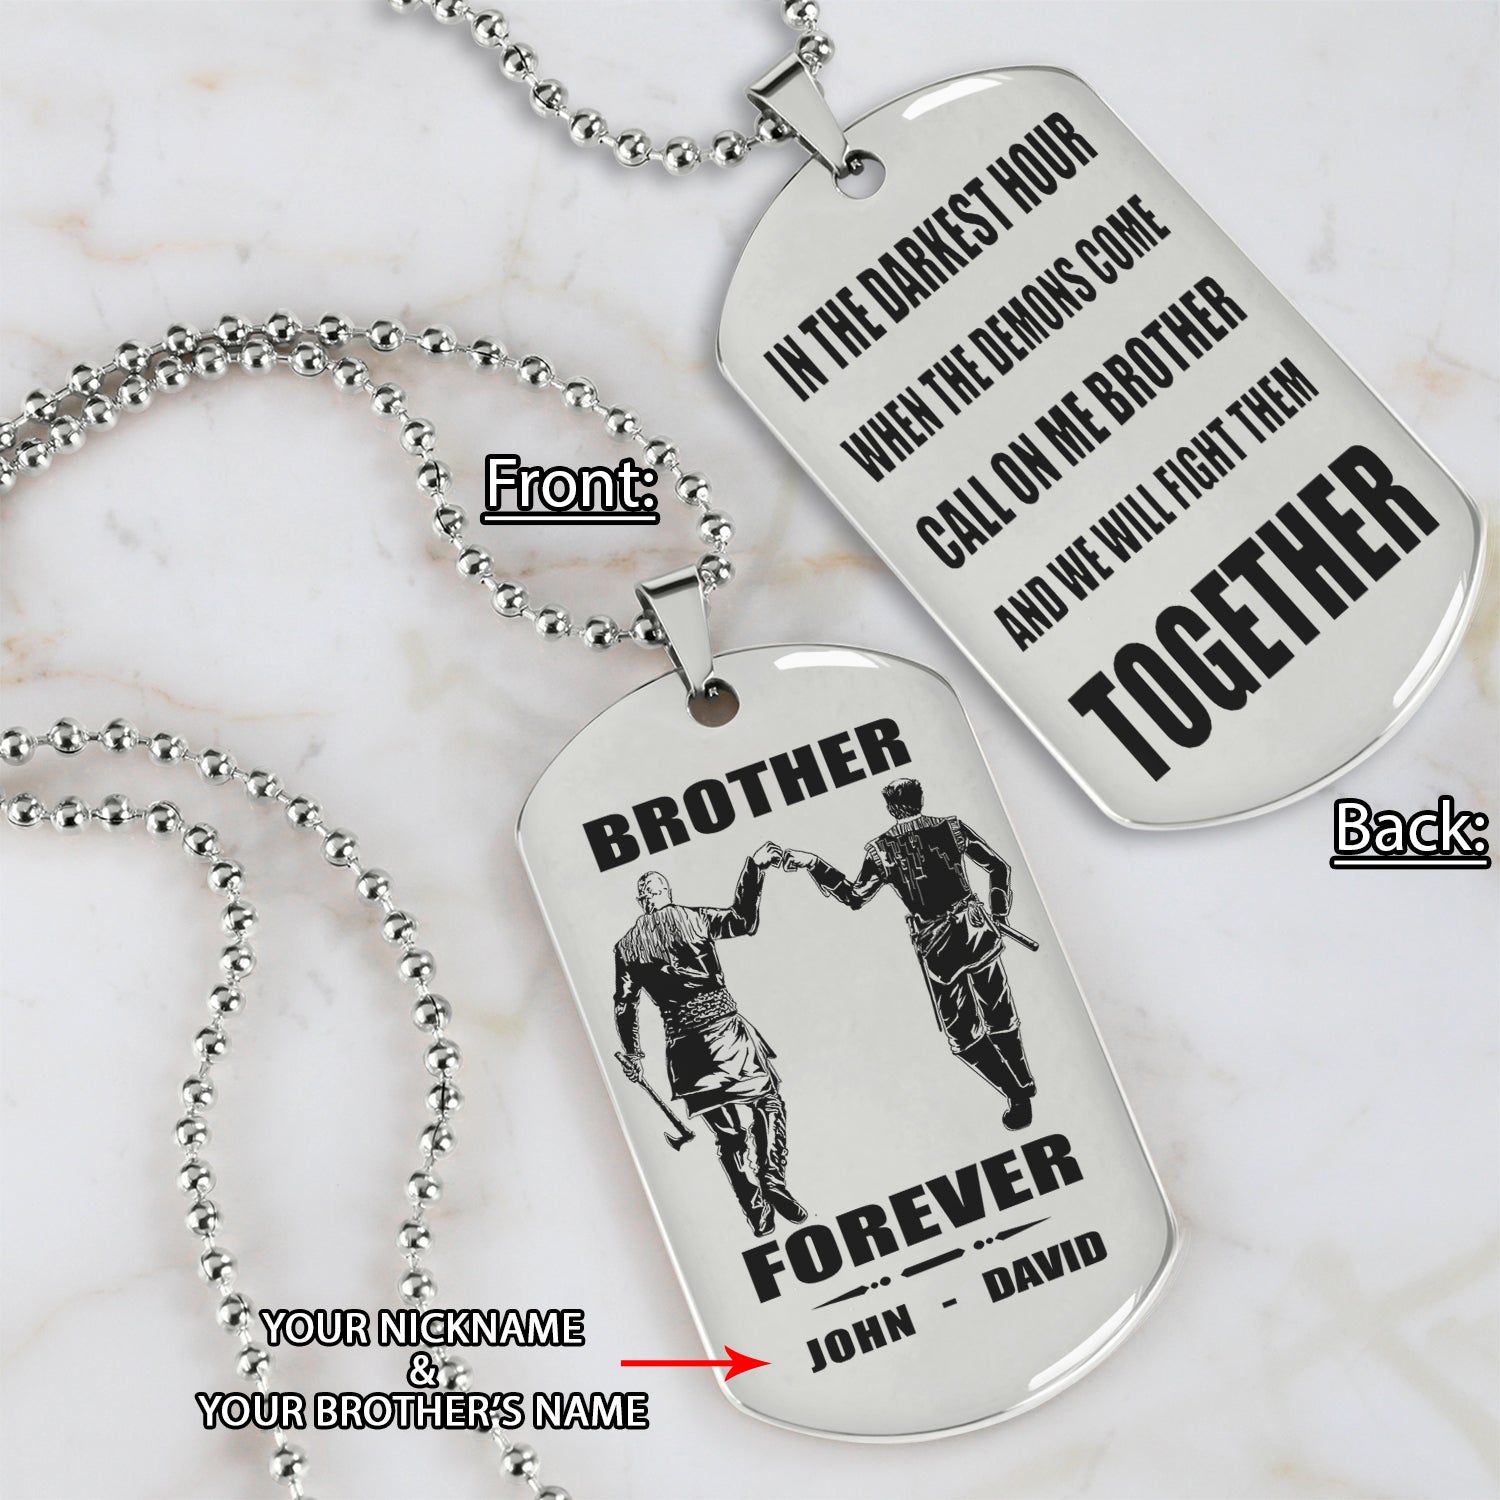 Samurai Call on me brother engraved white dog tag double sided. gift for brothers